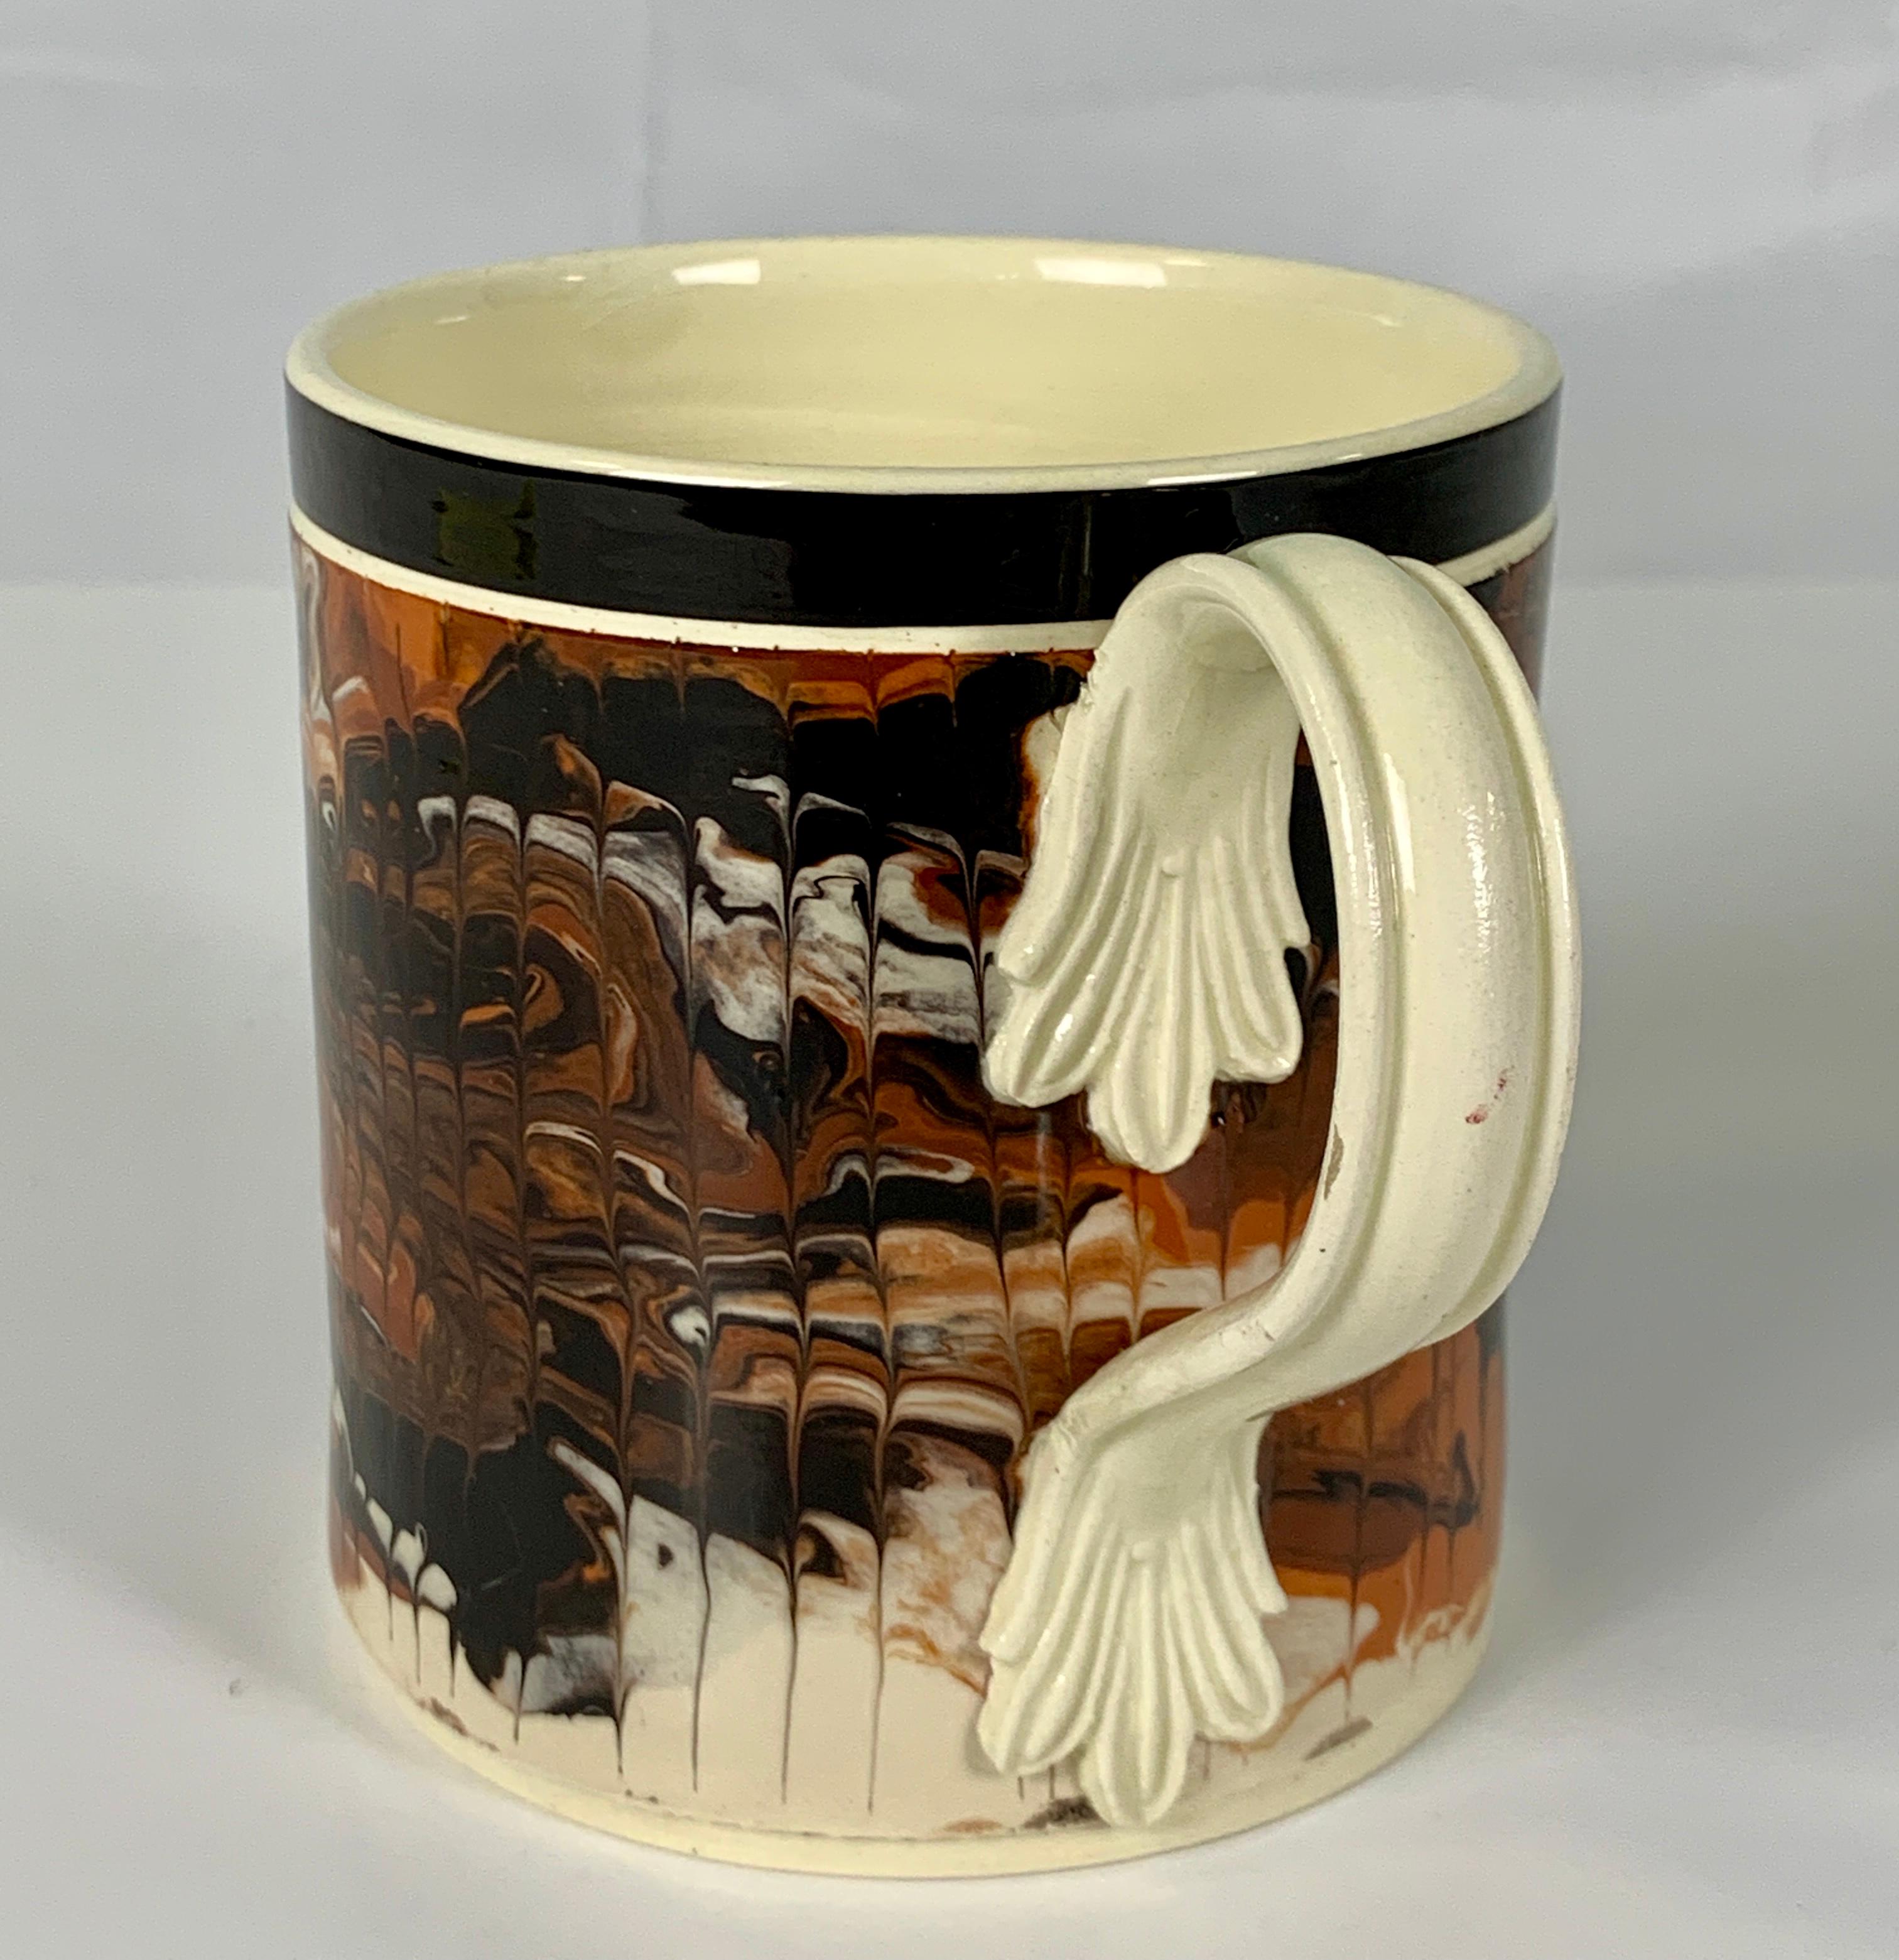 Country  Mochaware Mug Made by Don Carpentier in 1992